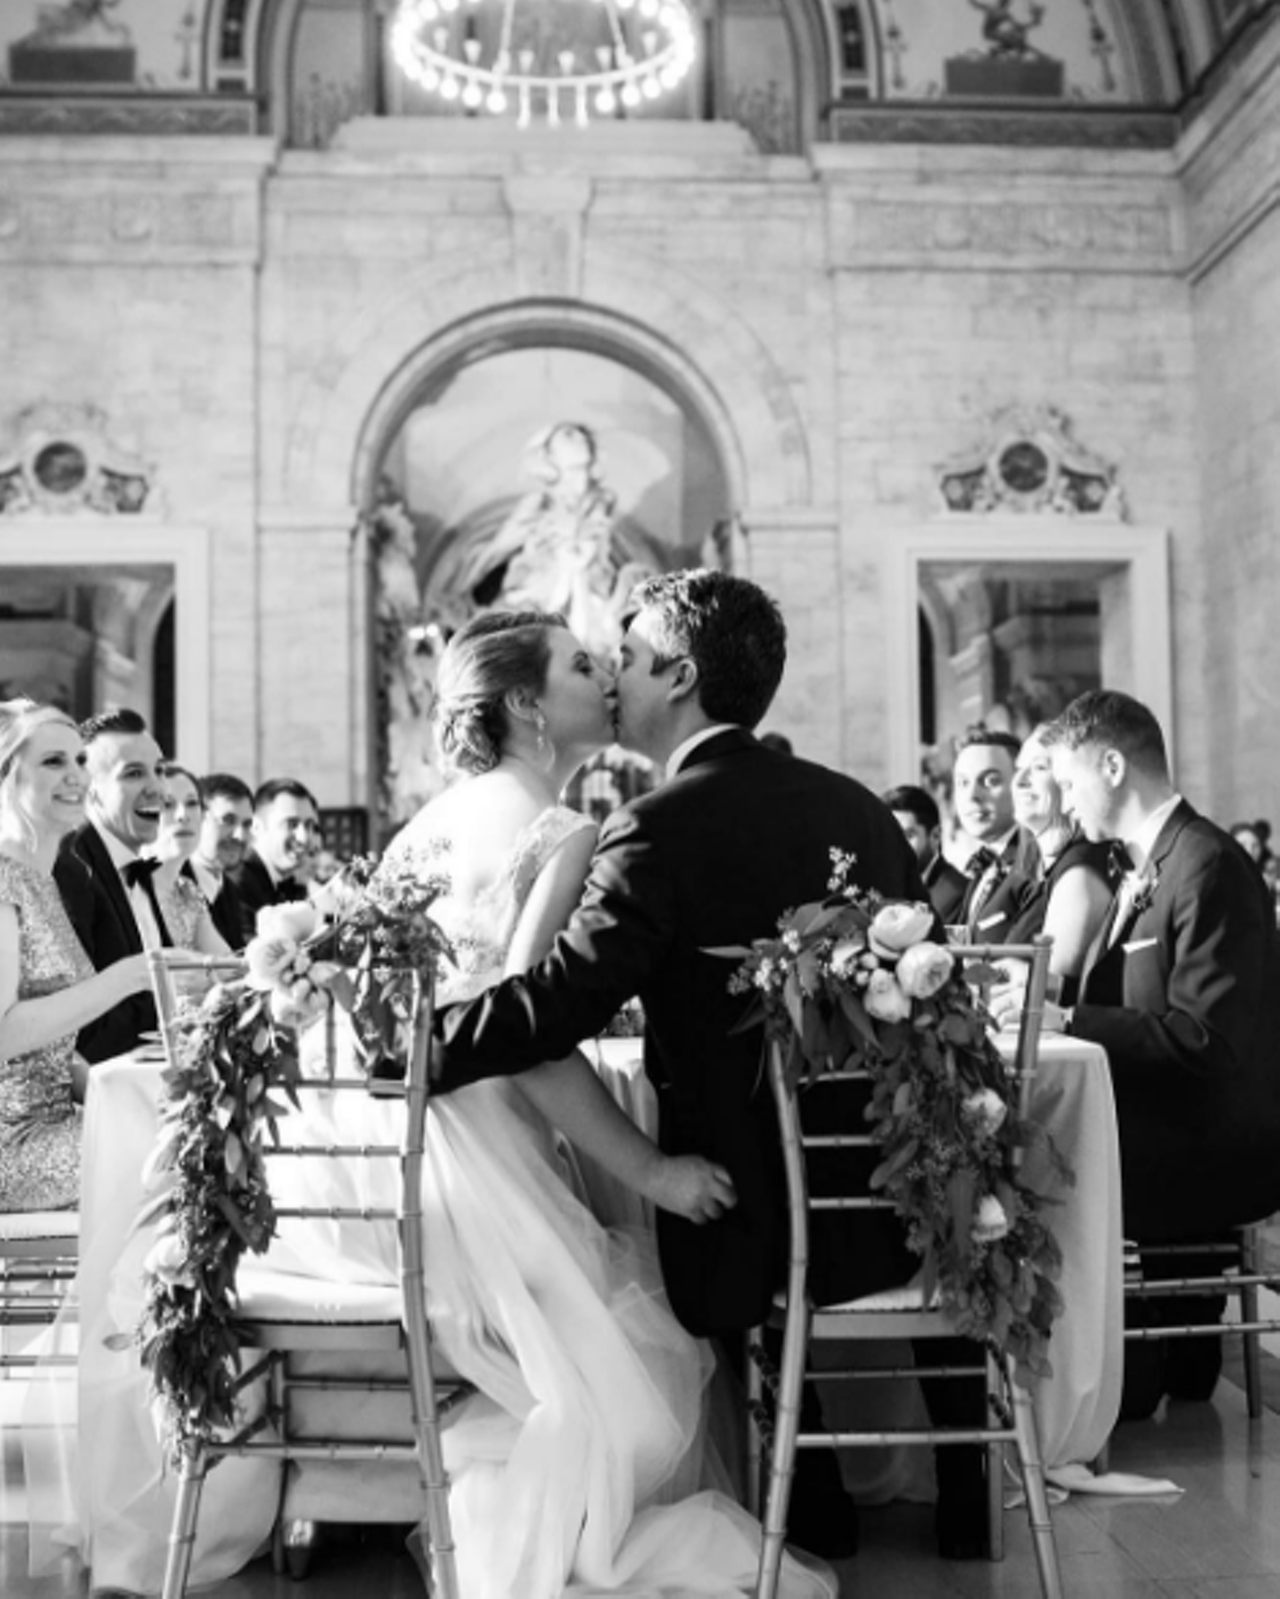 DIA- If you want a Detroit wedding and you want to be surrounded by art, then the DIA is the perfect place. Plus, with tons of different spaces within the DIA, the options are endless. 
5200 Woodward Ave, Detroit. Photo via Instagram user @nikimariephoto